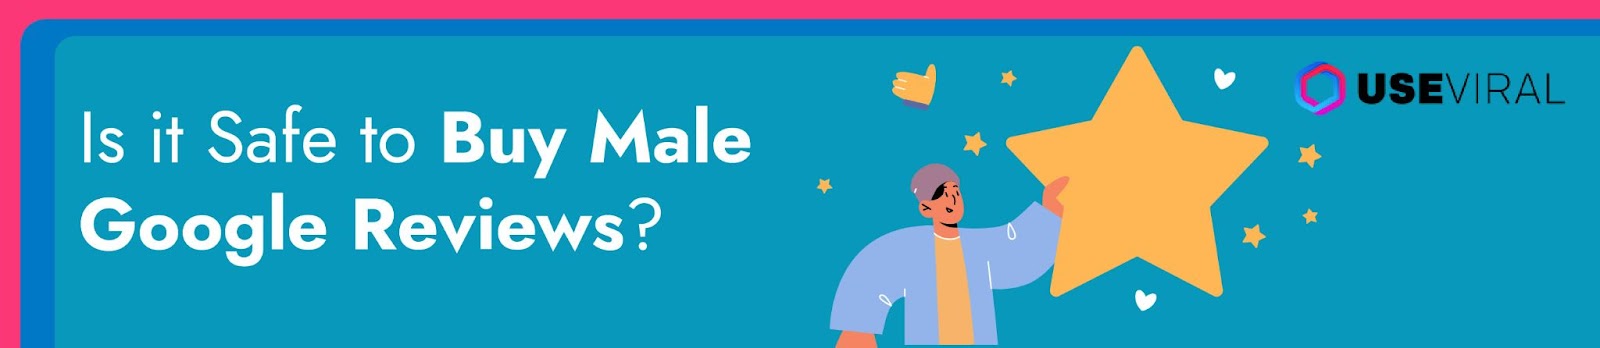 Is it Safe to Buy Male Google Reviews?